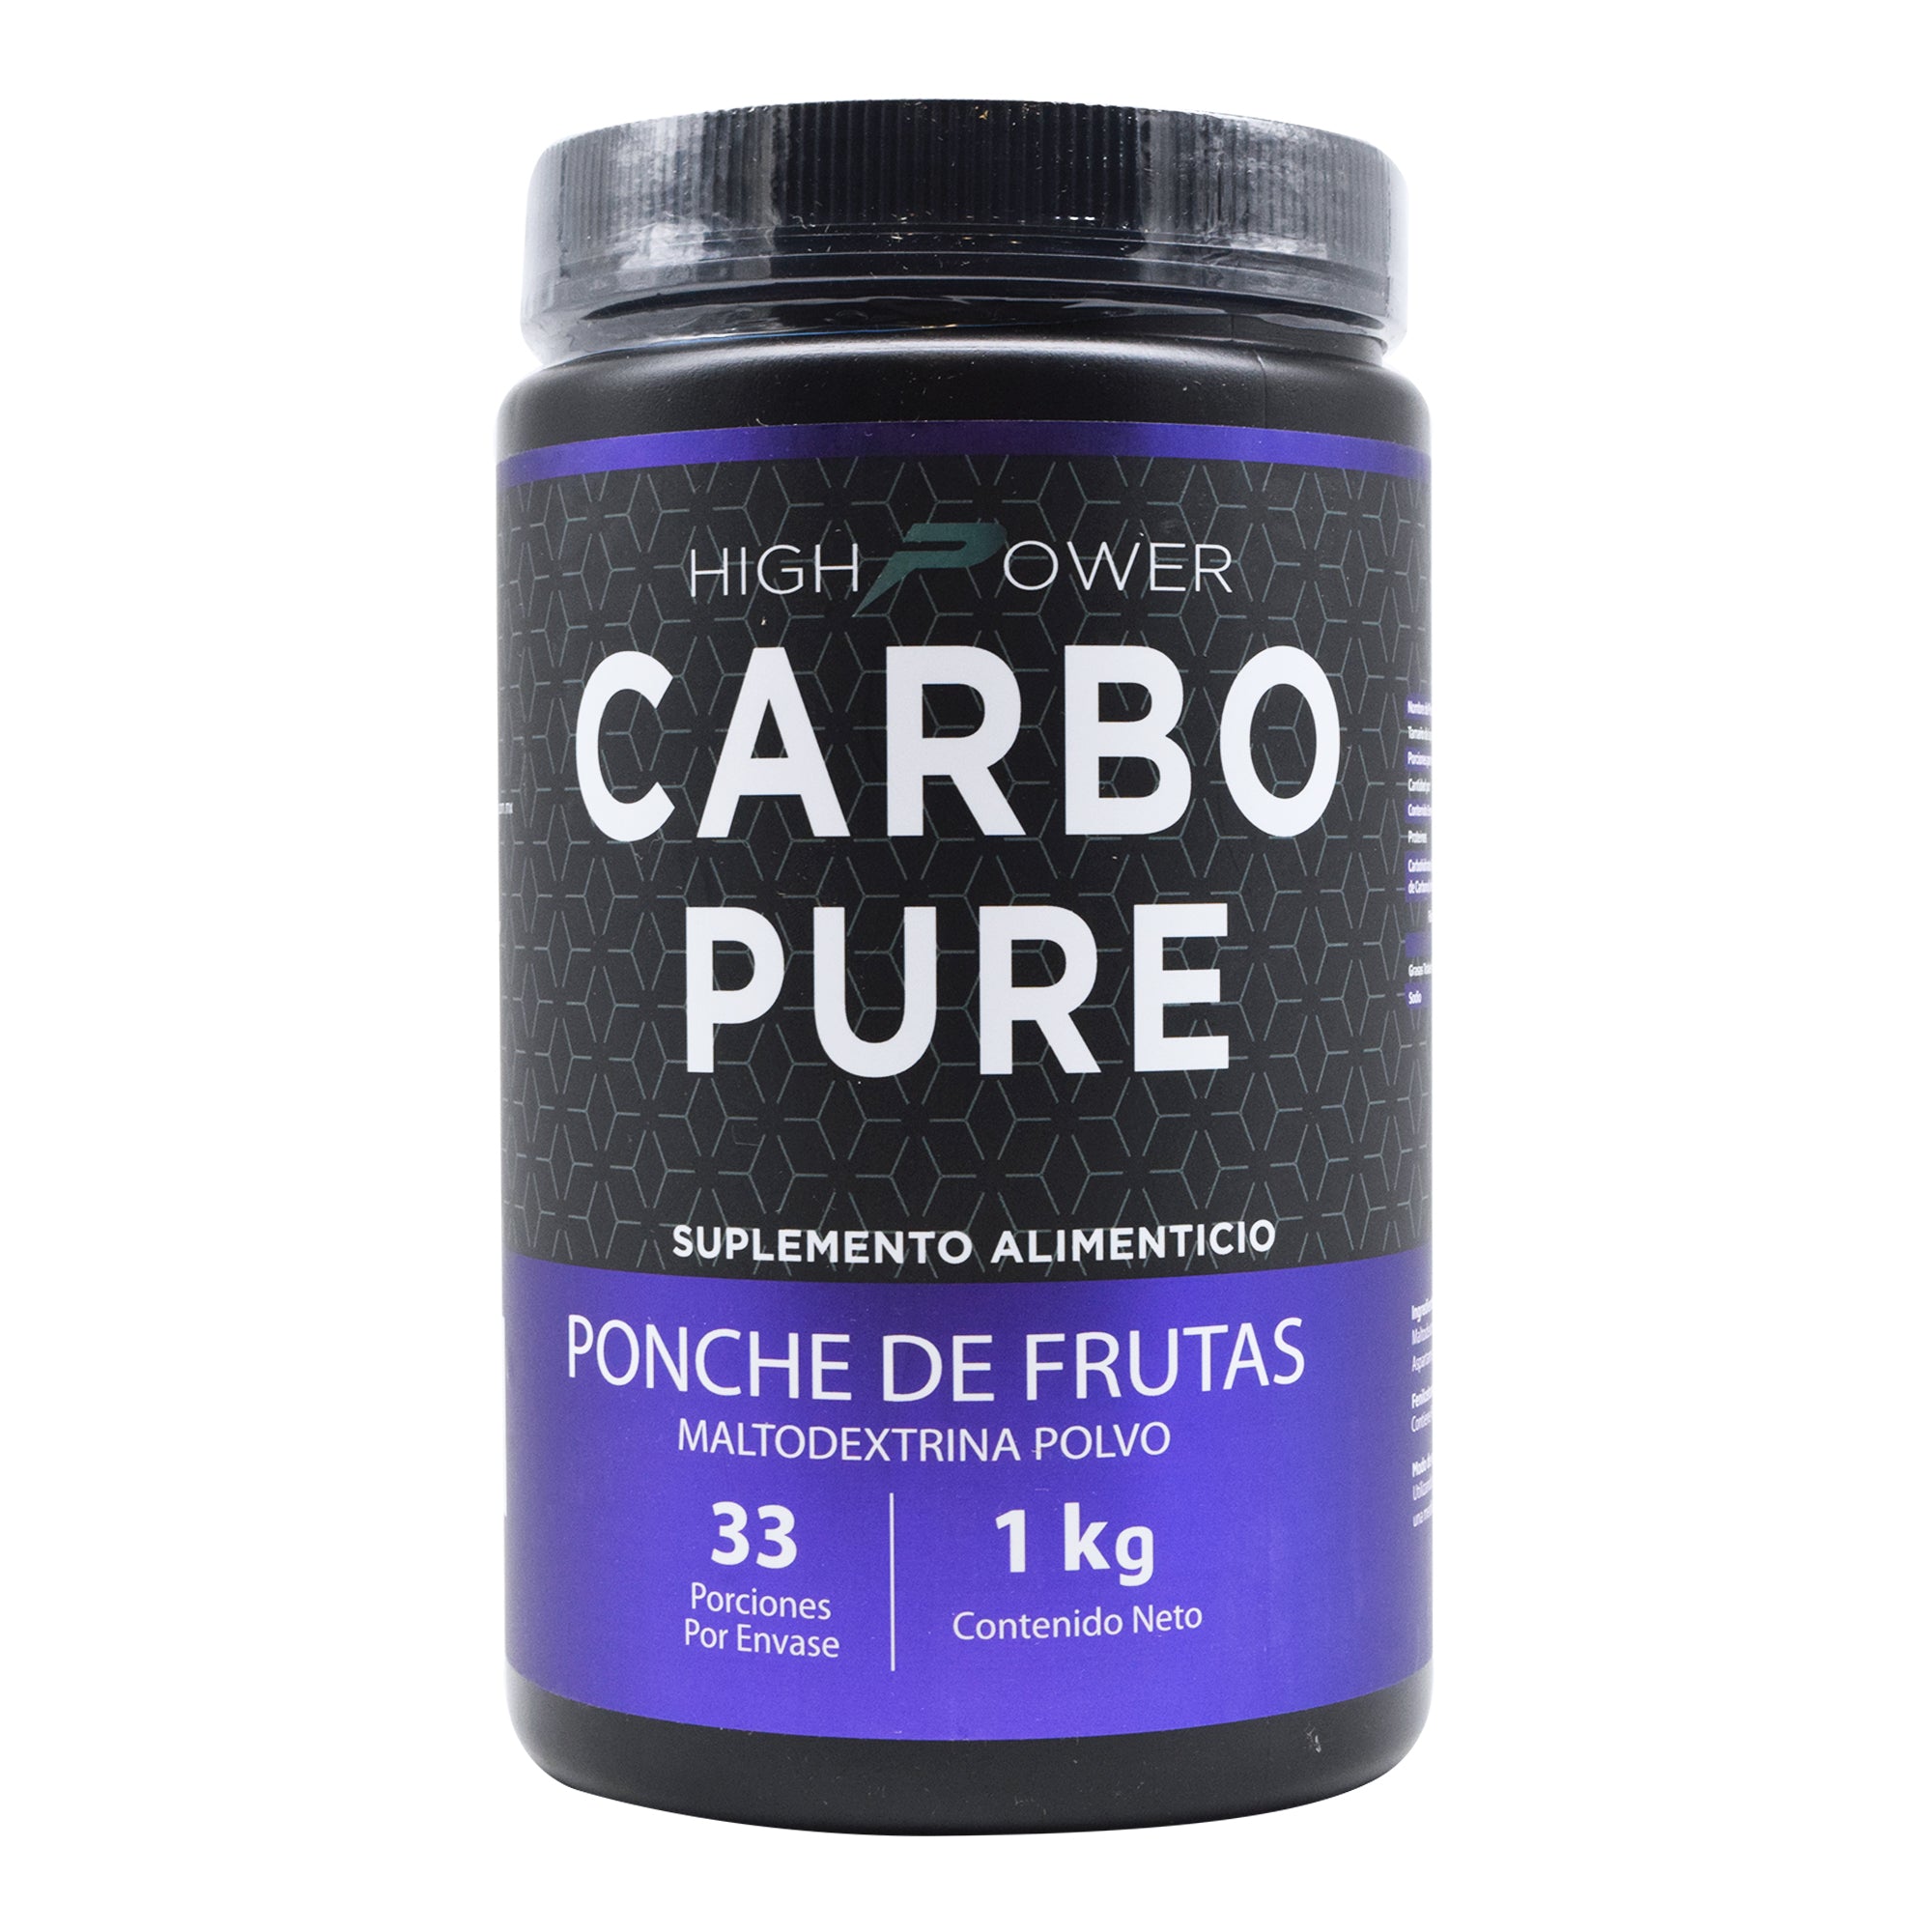 CARBOPURE 1 KG